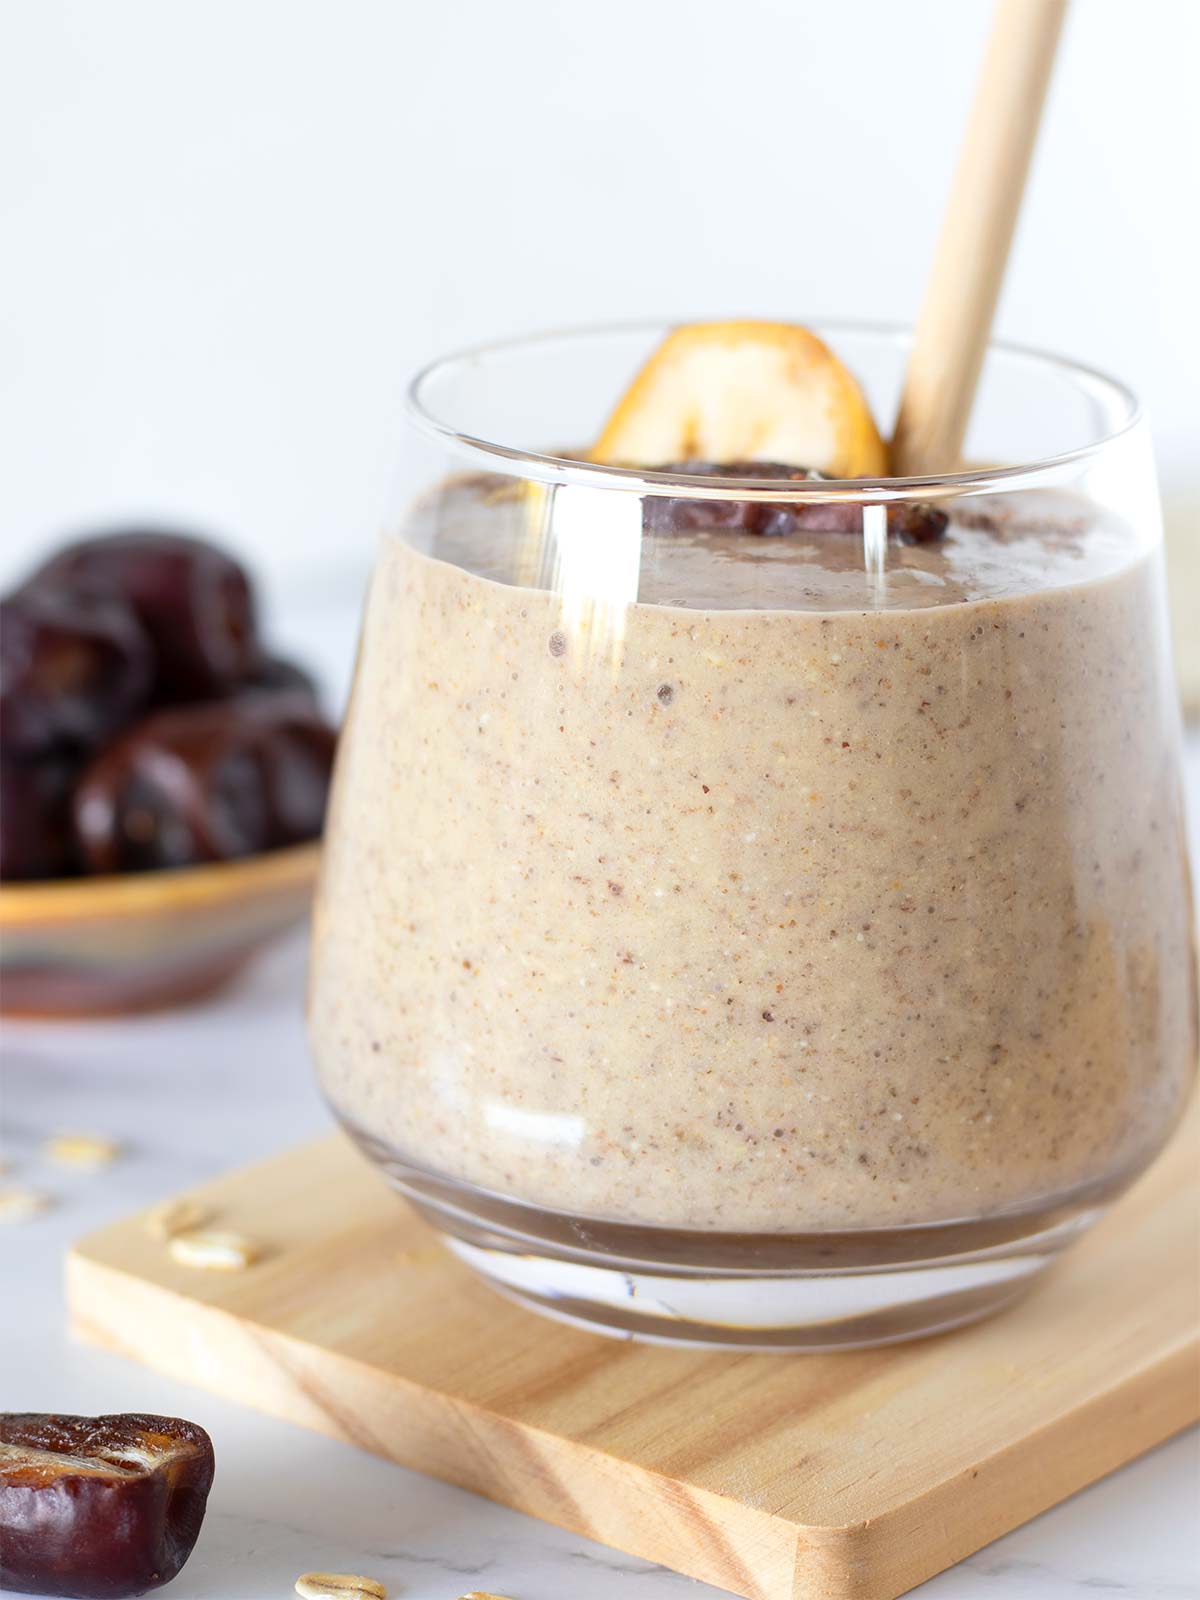 Date breakfast smoothie with banana and oats.